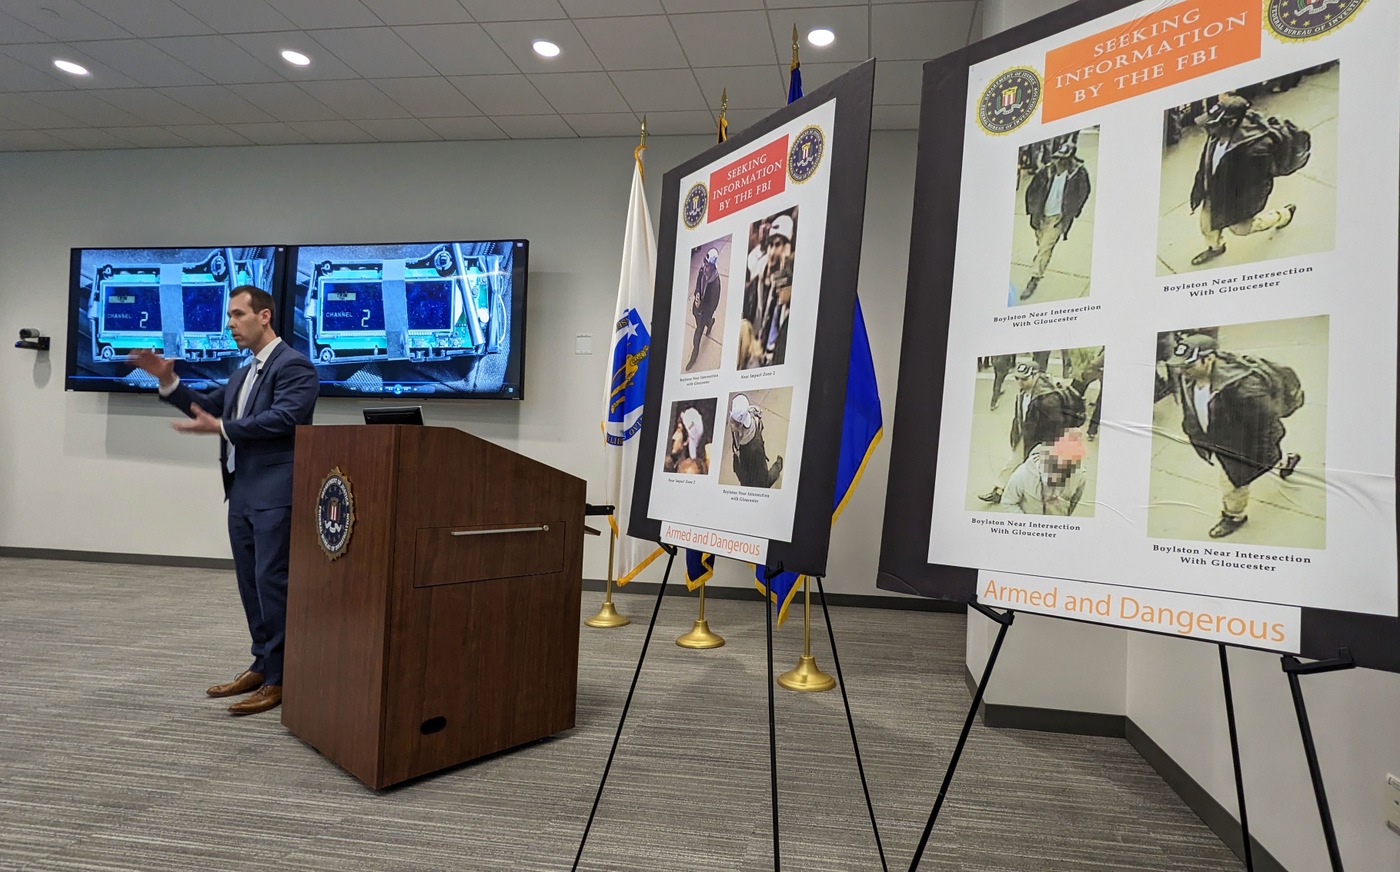 FBI Boston Special Agent Tim Brown during presentation at 10-year-anniversary remembrance event in March 2023 at the Boston Field Office.